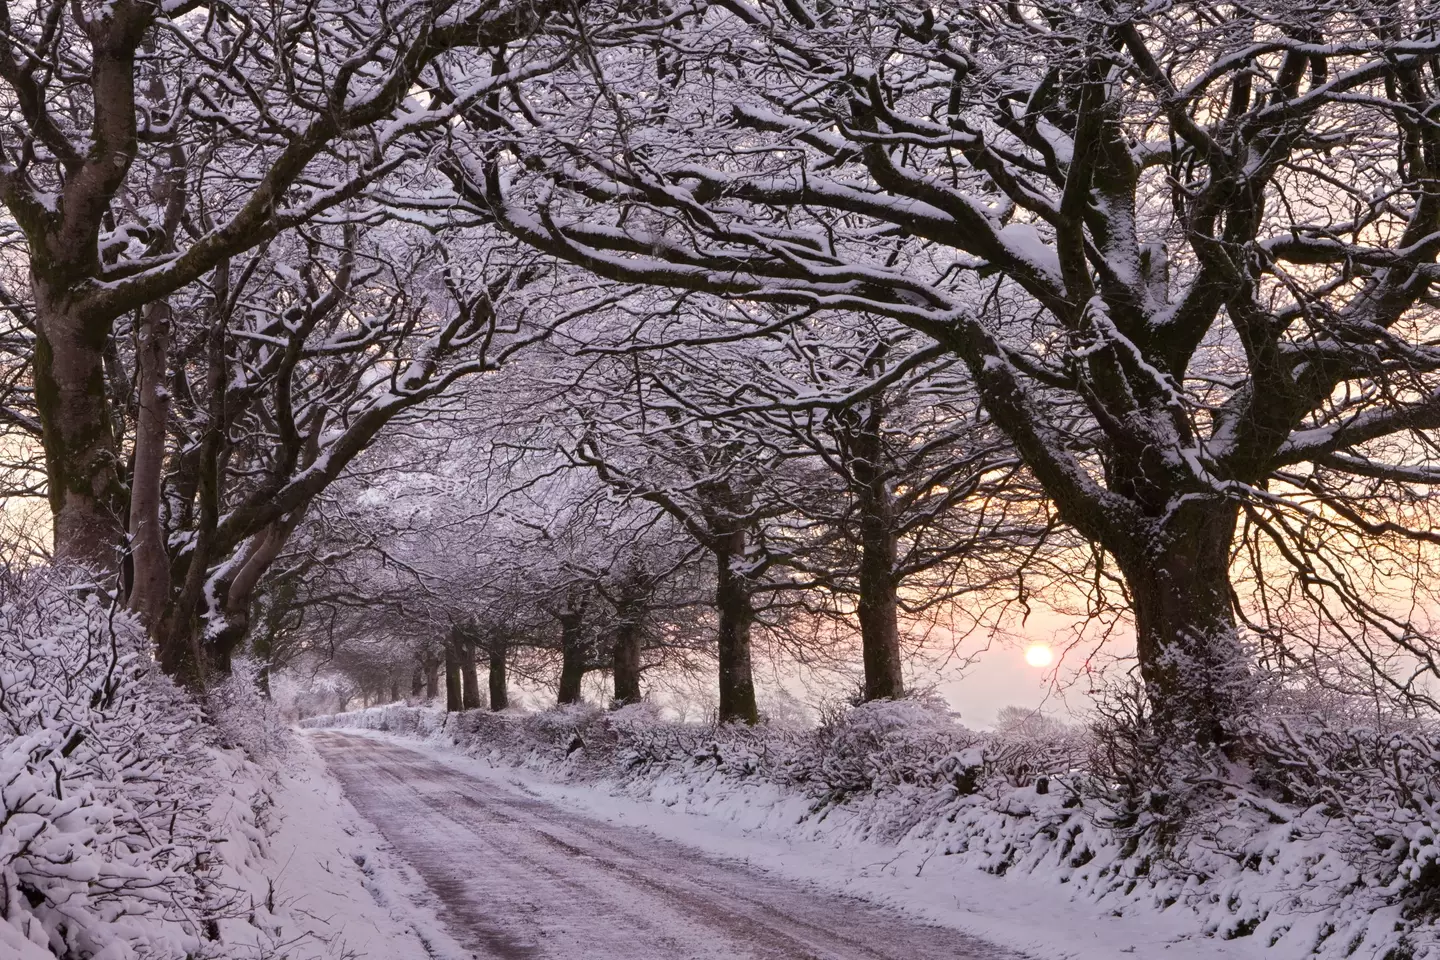 Large parts of the country could be buried in snow as the cold weather hits.